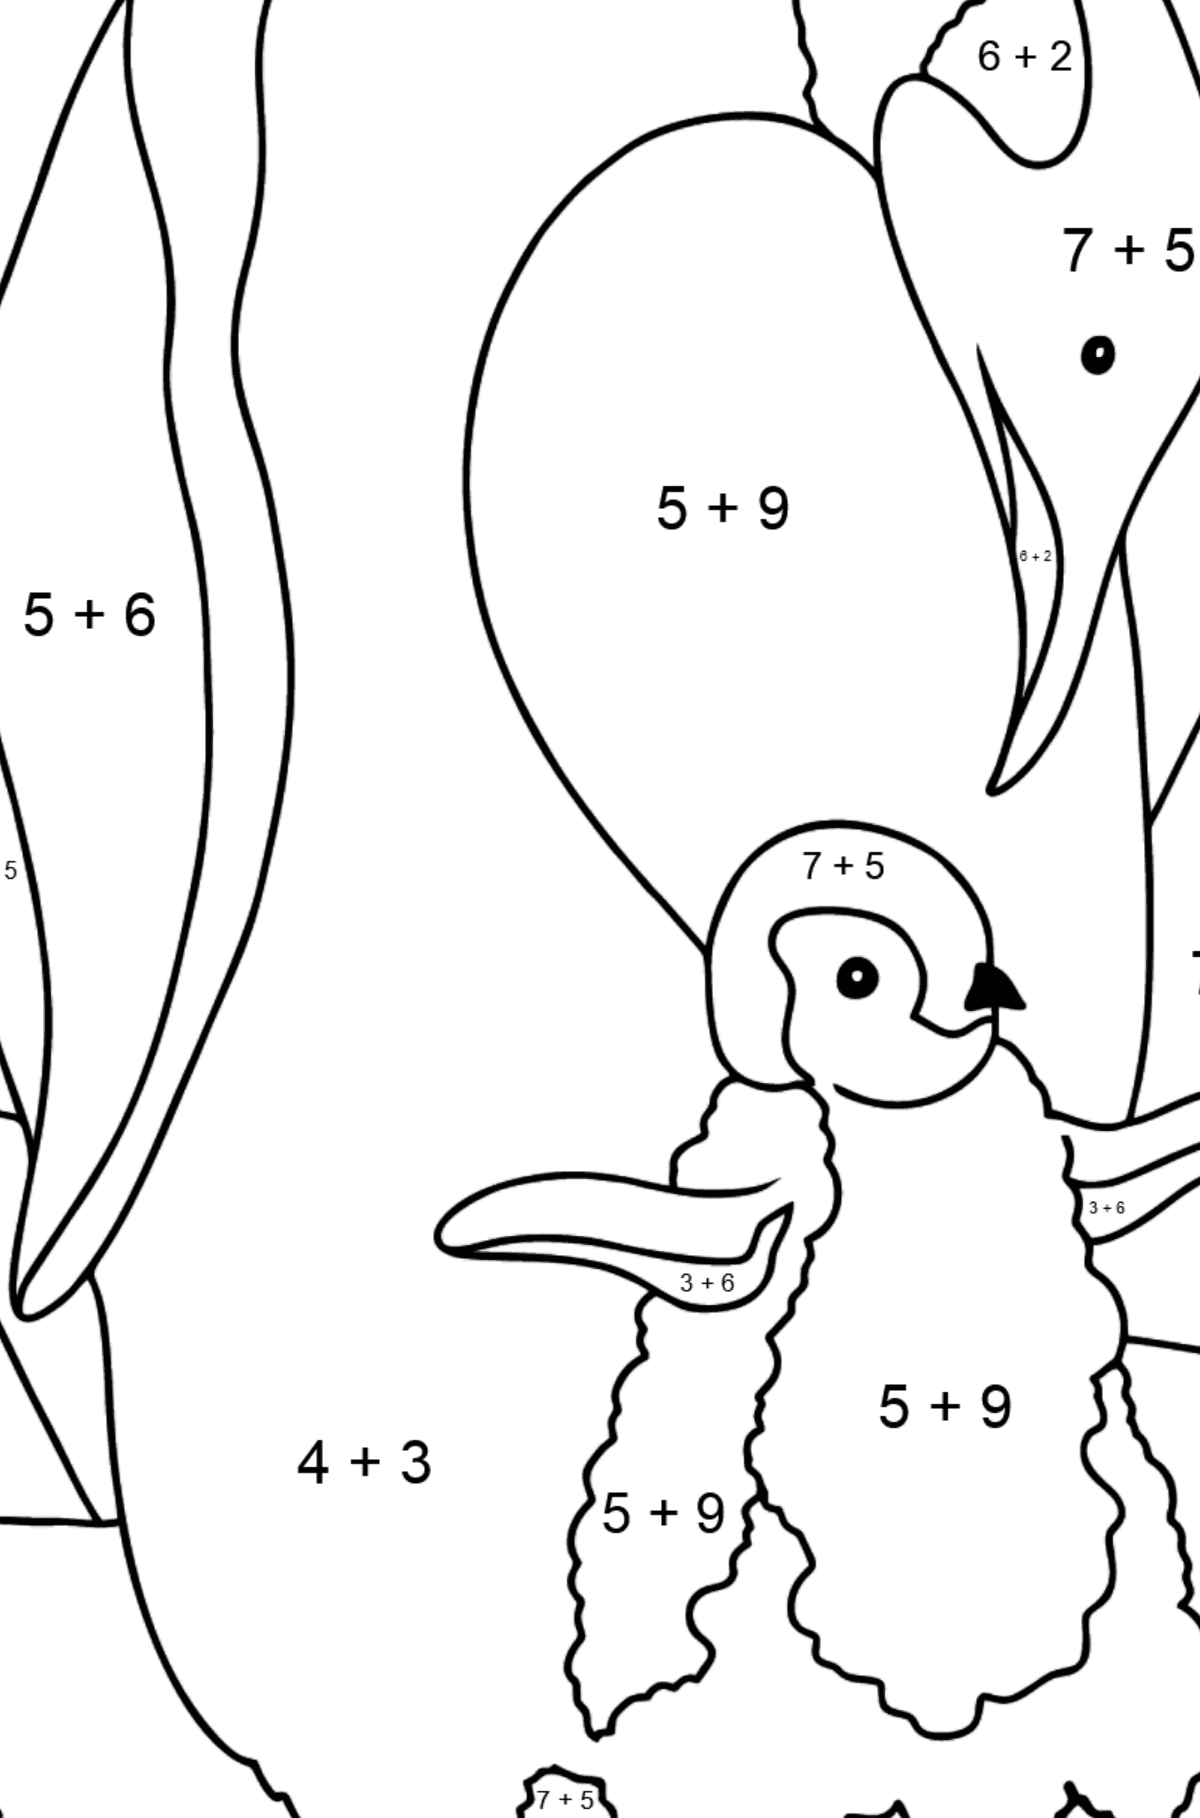 Coloring Page - A Penguin with a Baby - Math Coloring - Addition for Kids